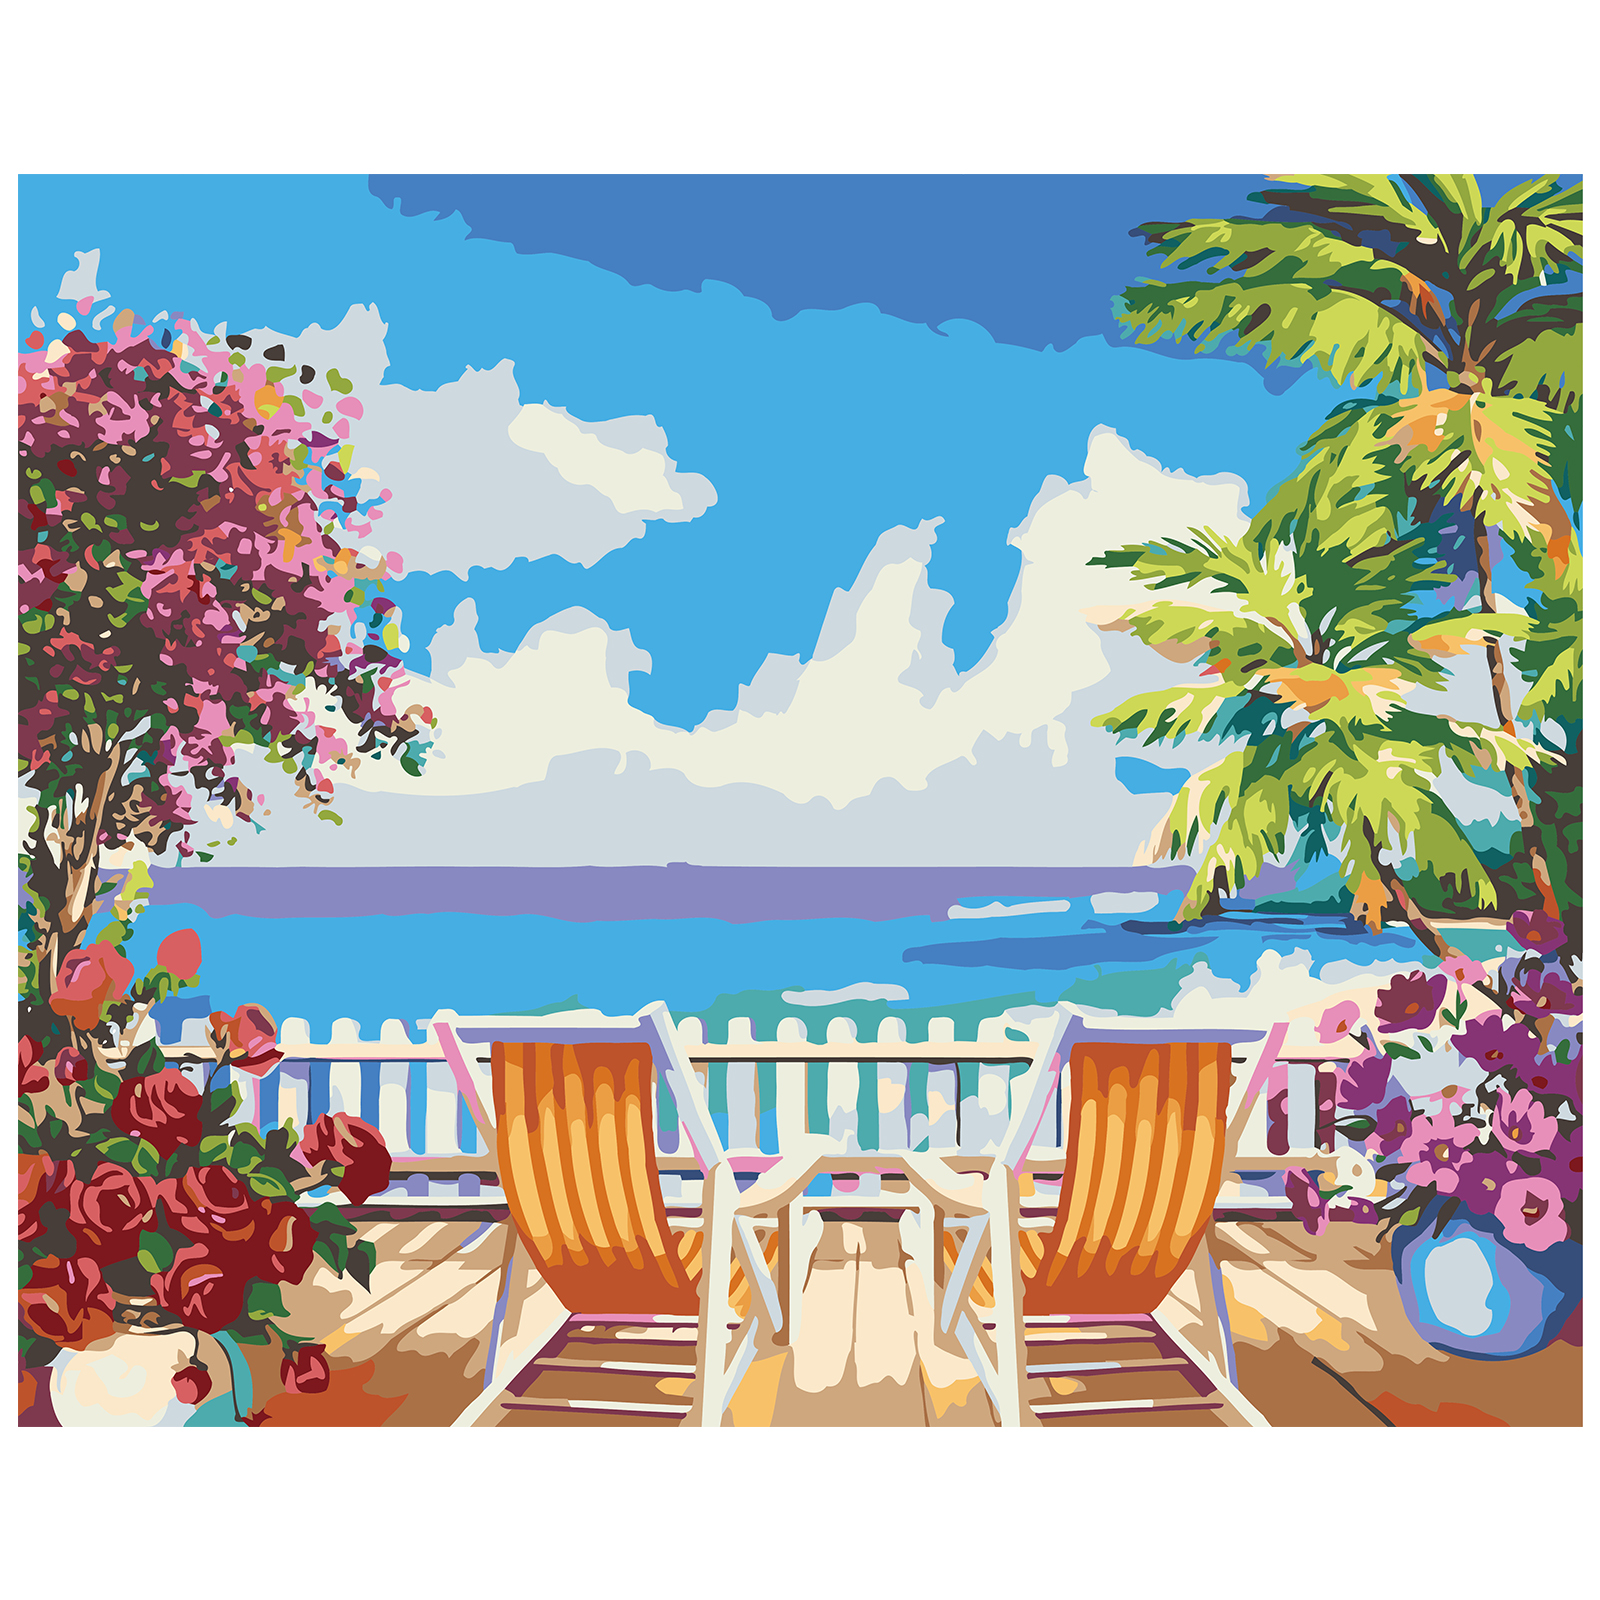 VOCHIC DIY Paint by Number Beach Landscape on Canvas Painting Kit for Adults  Home Wall Decor 16x20 In (Without Frame) 